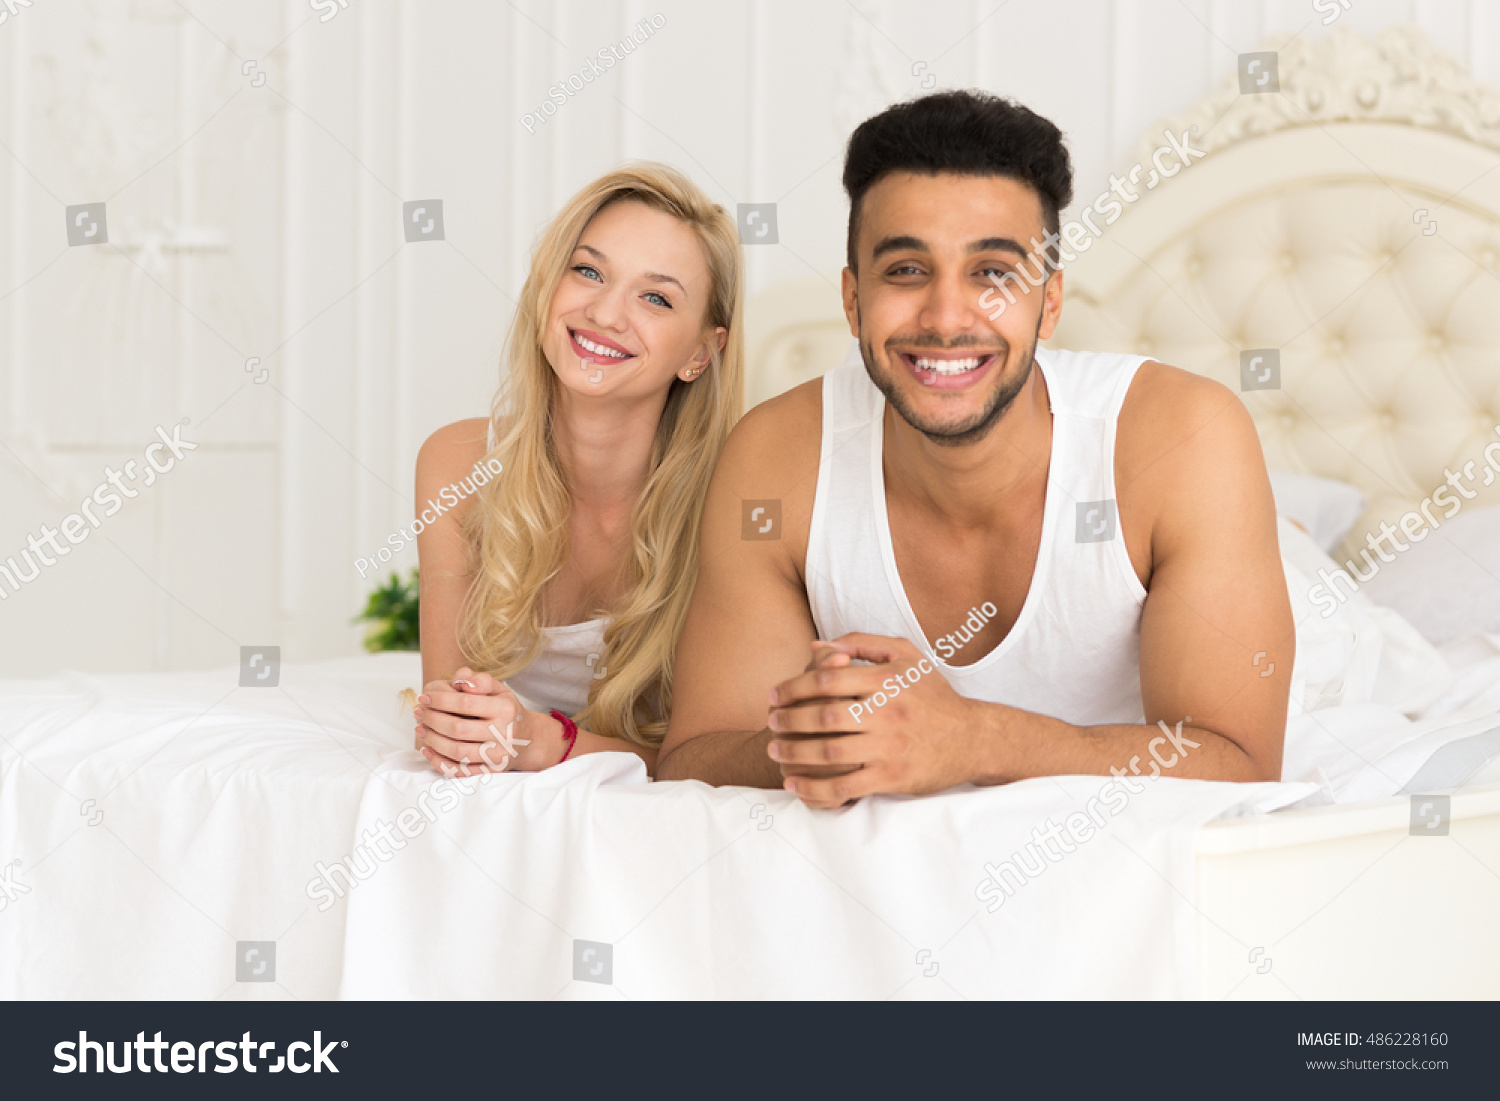 Young Couple Lying Bed Happy Smile Stock Photo 486228160